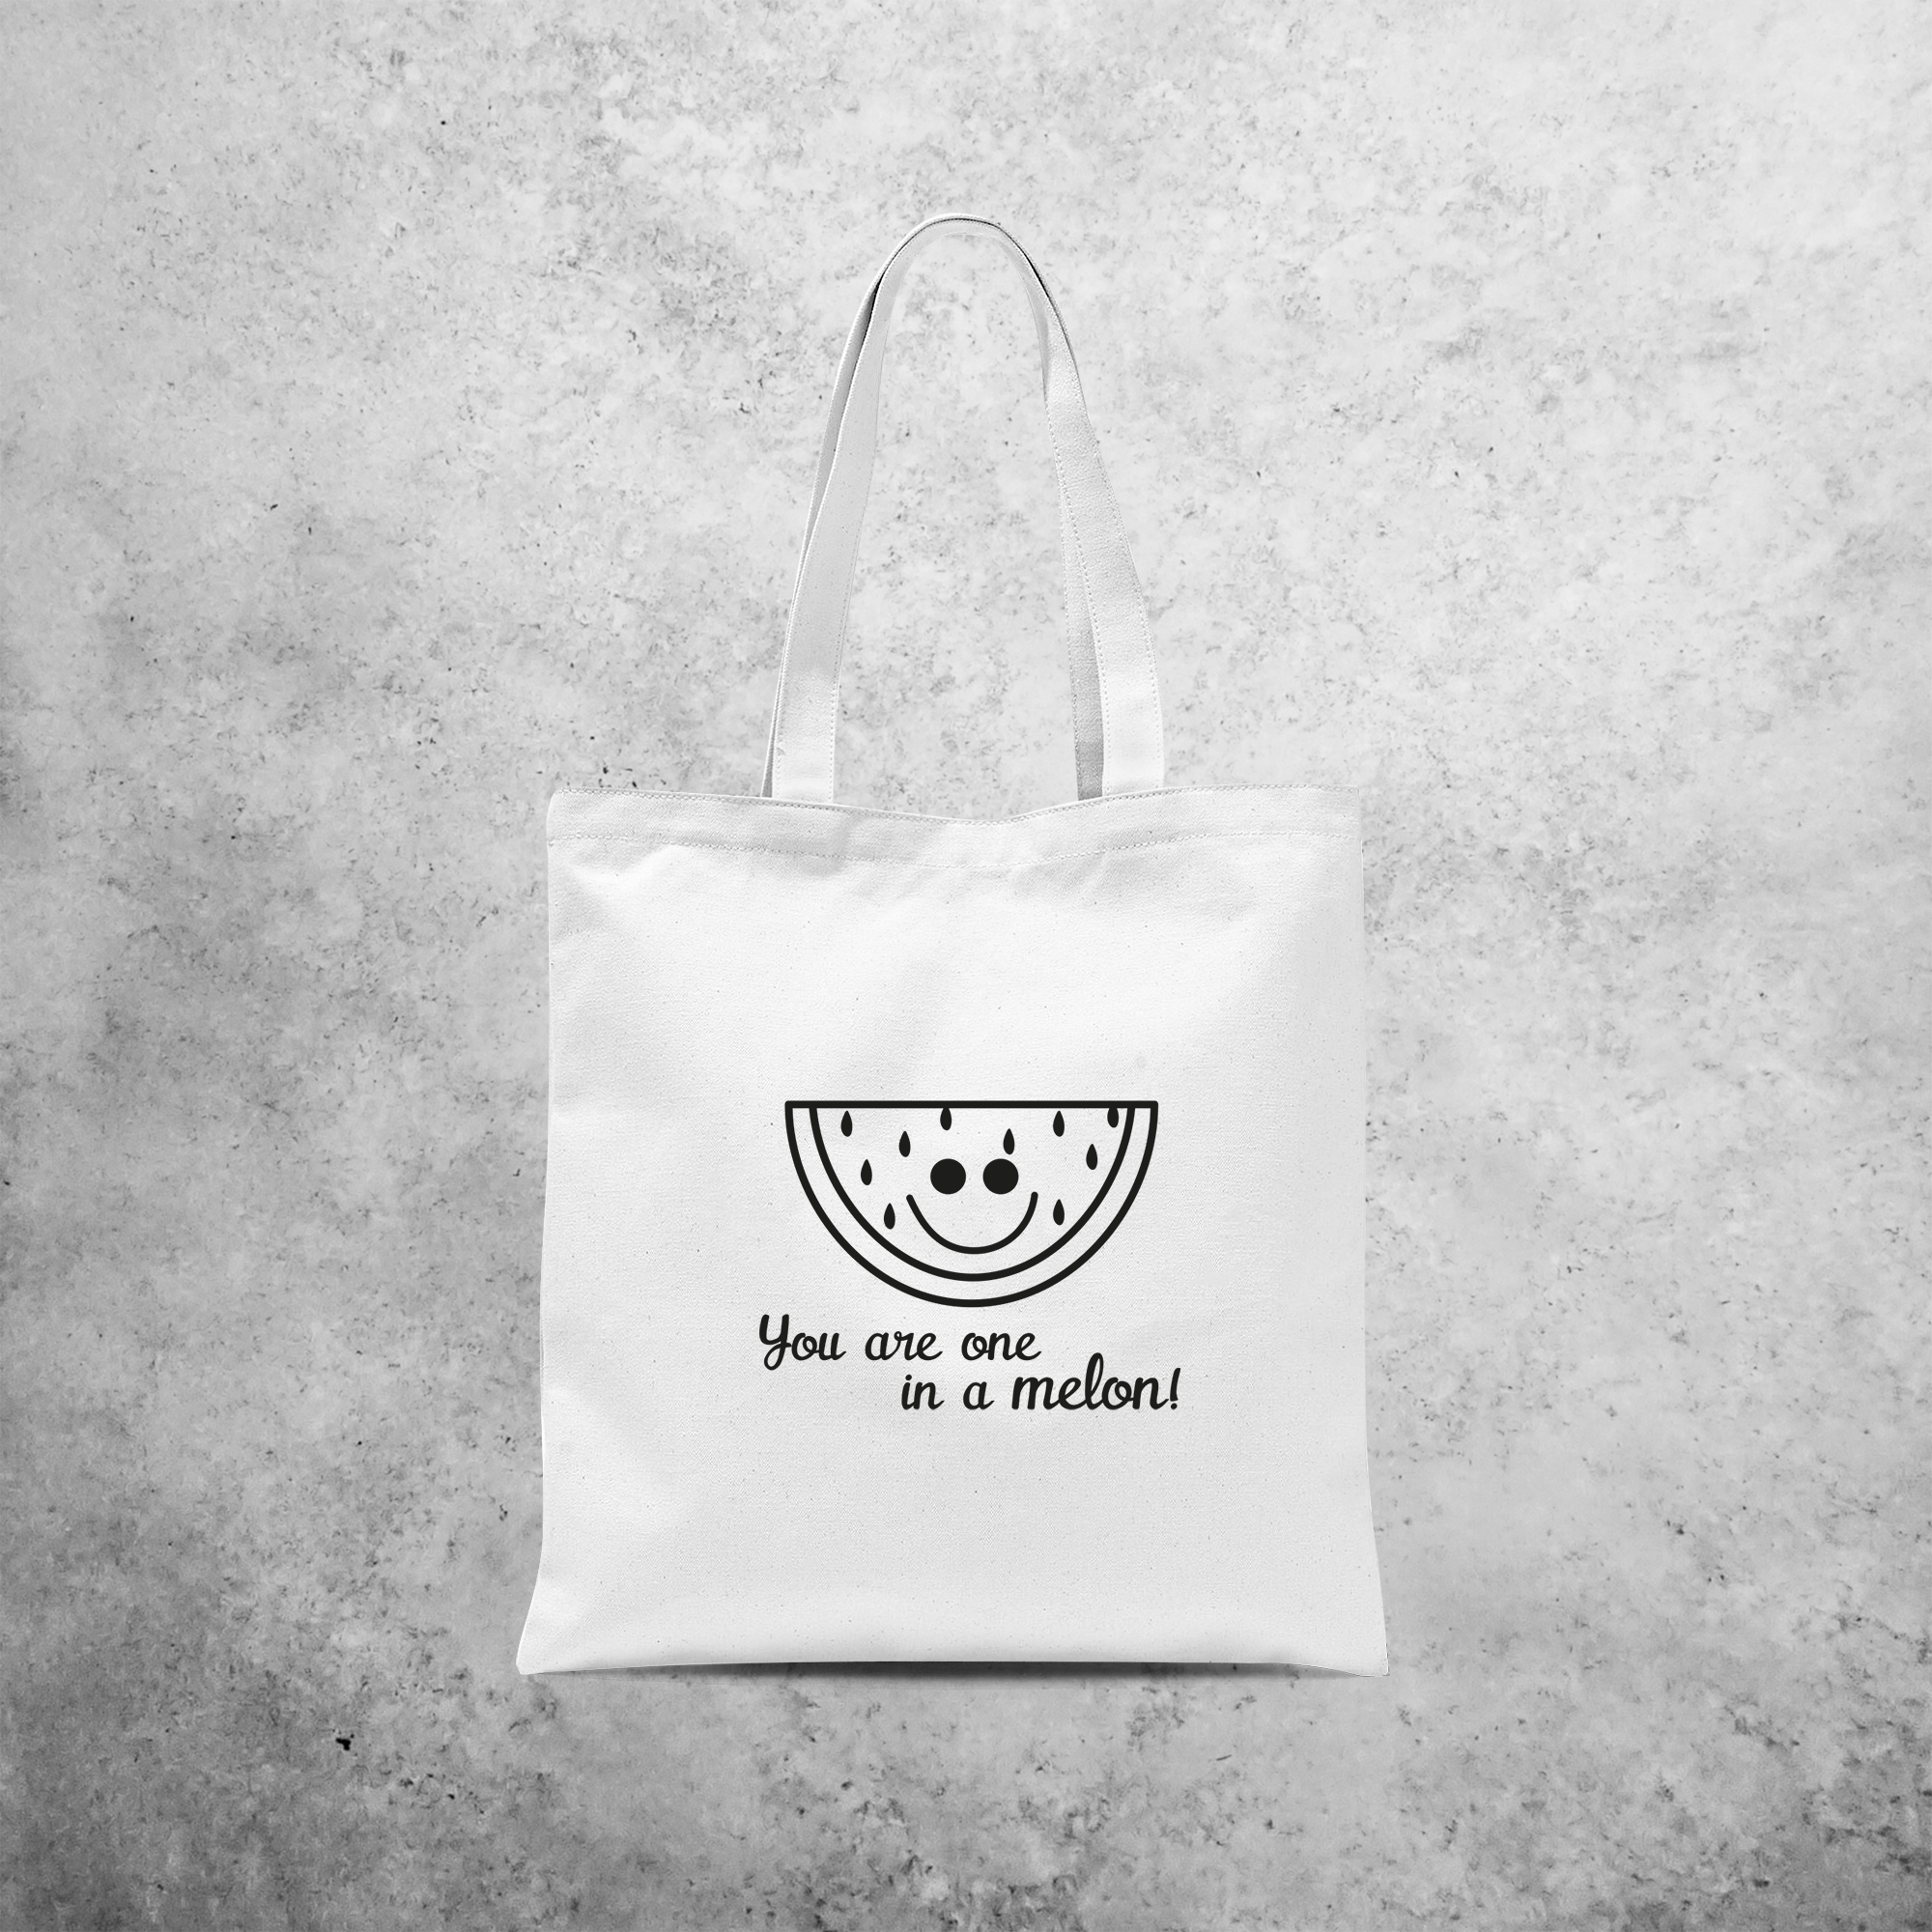 'You are one in a melon' tote bag